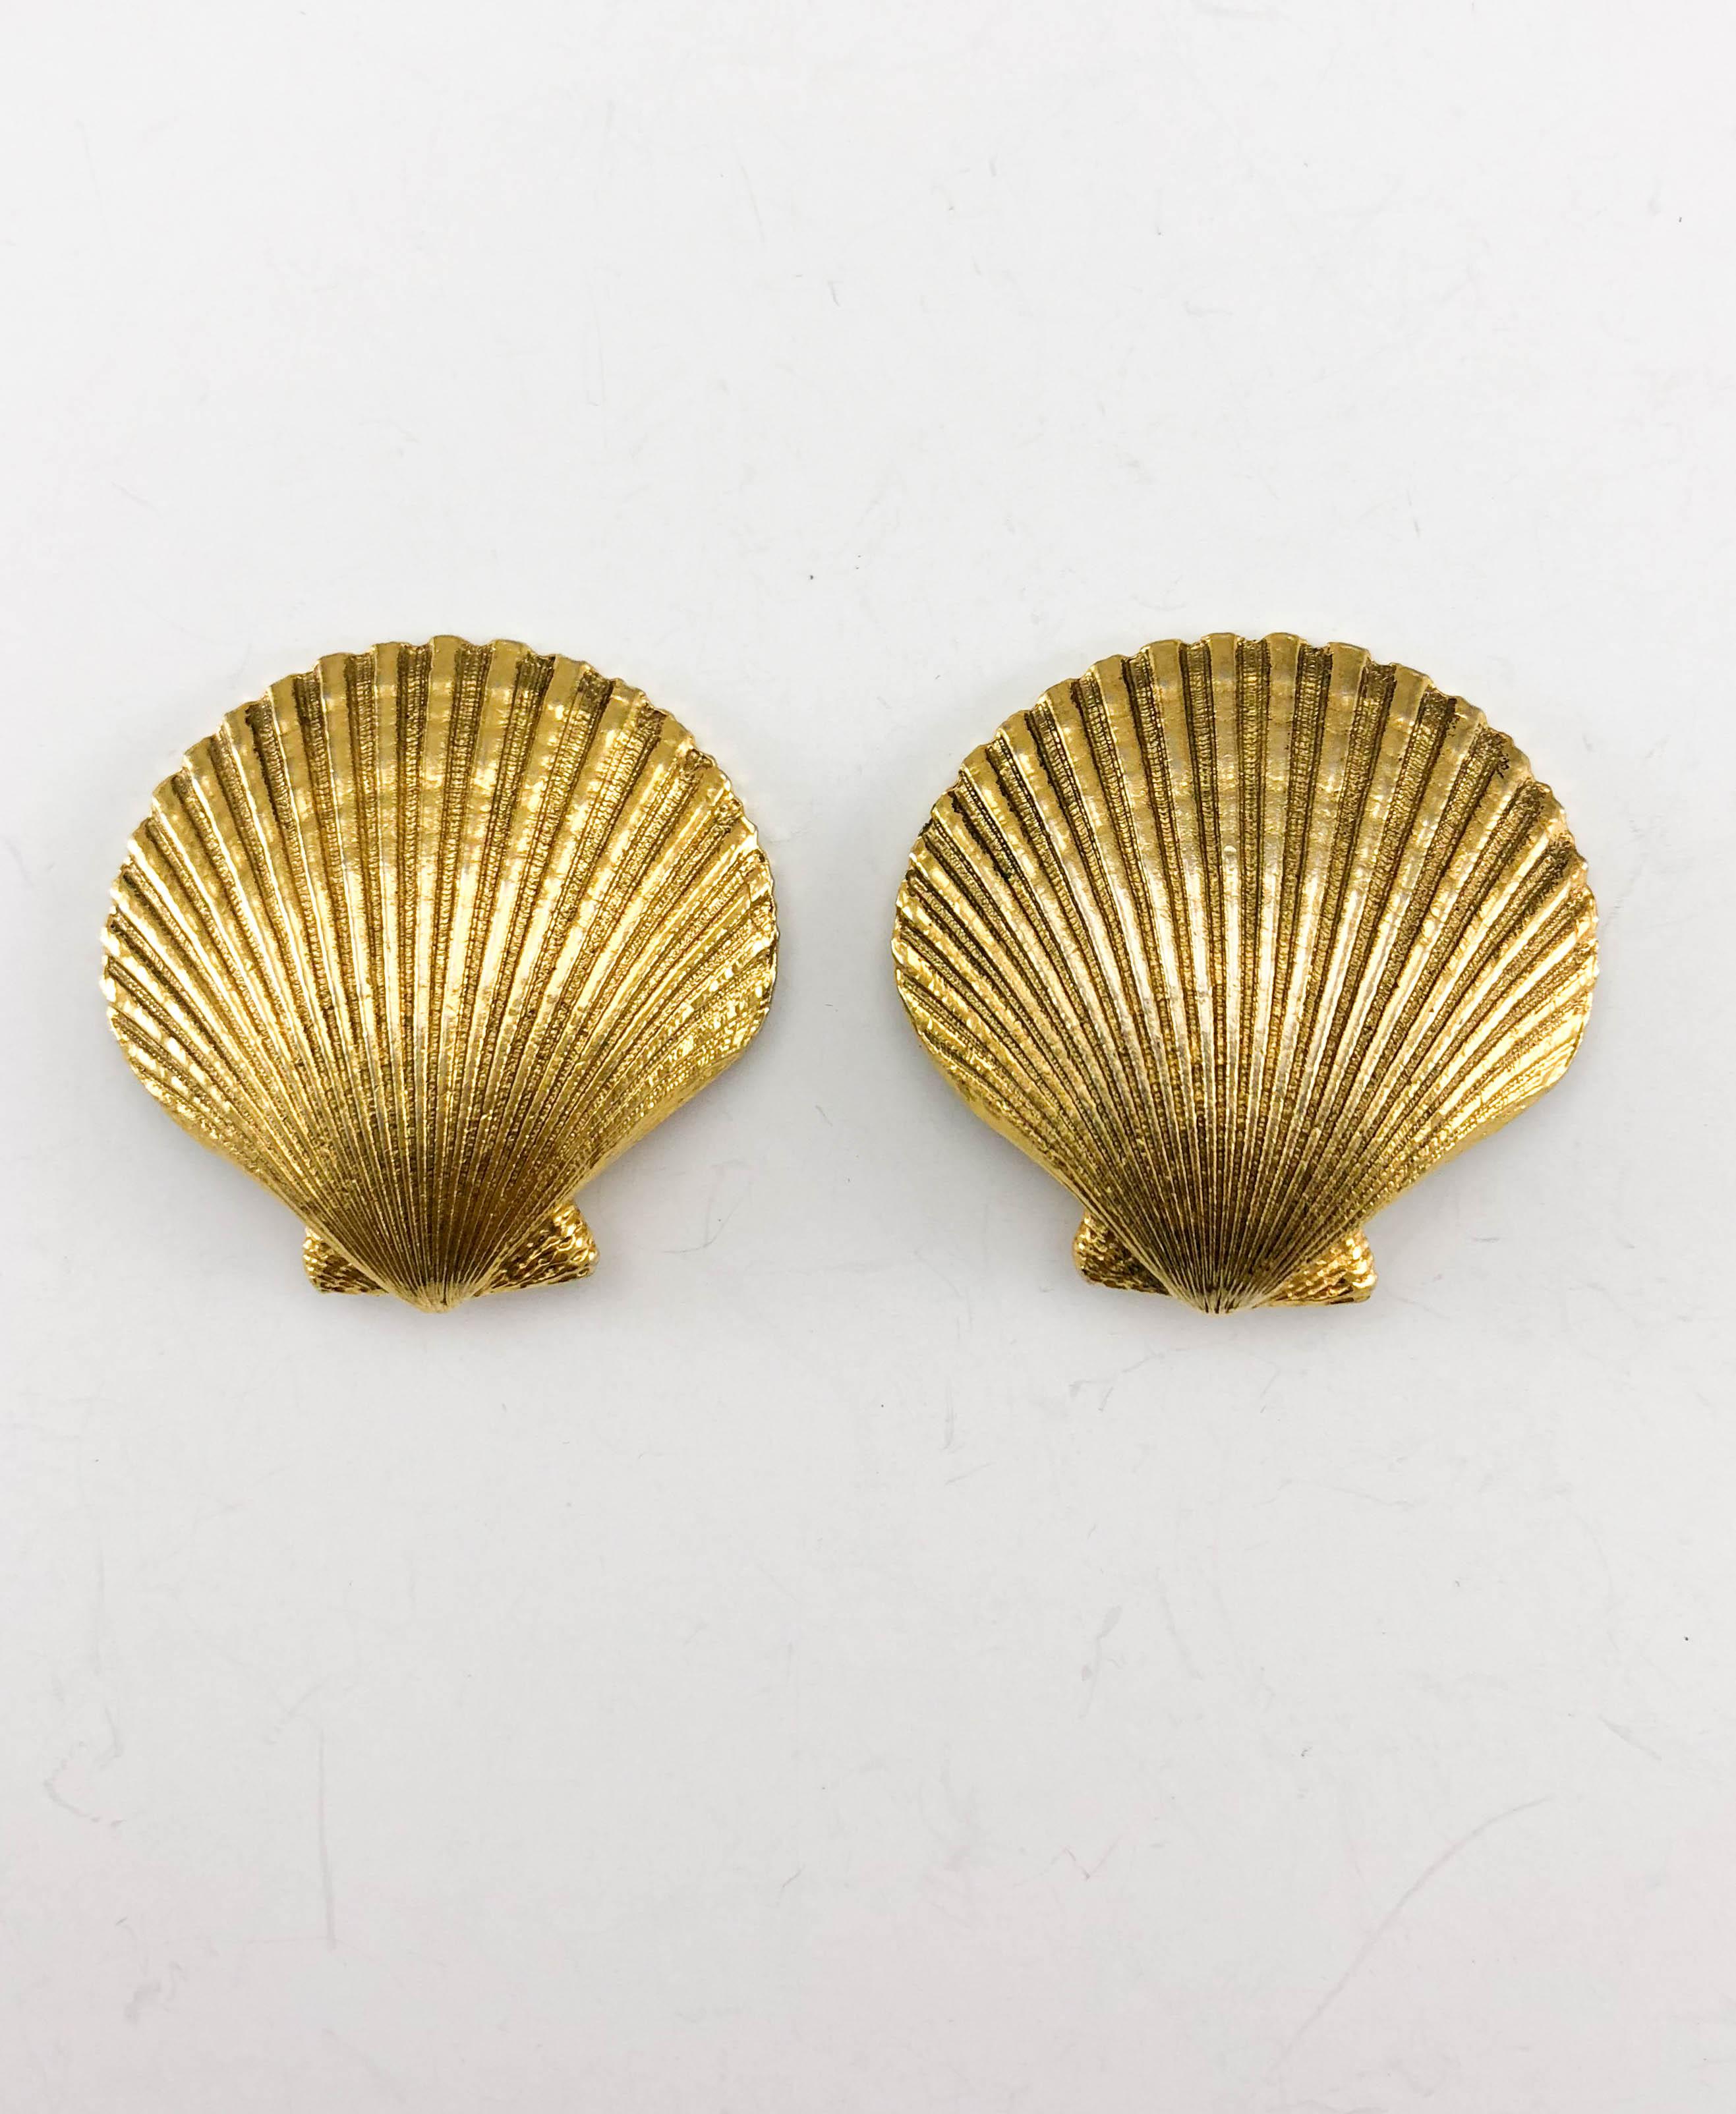 1980's Yves Saint Laurent Gilt Seashell Earrings In Excellent Condition For Sale In London, Chelsea